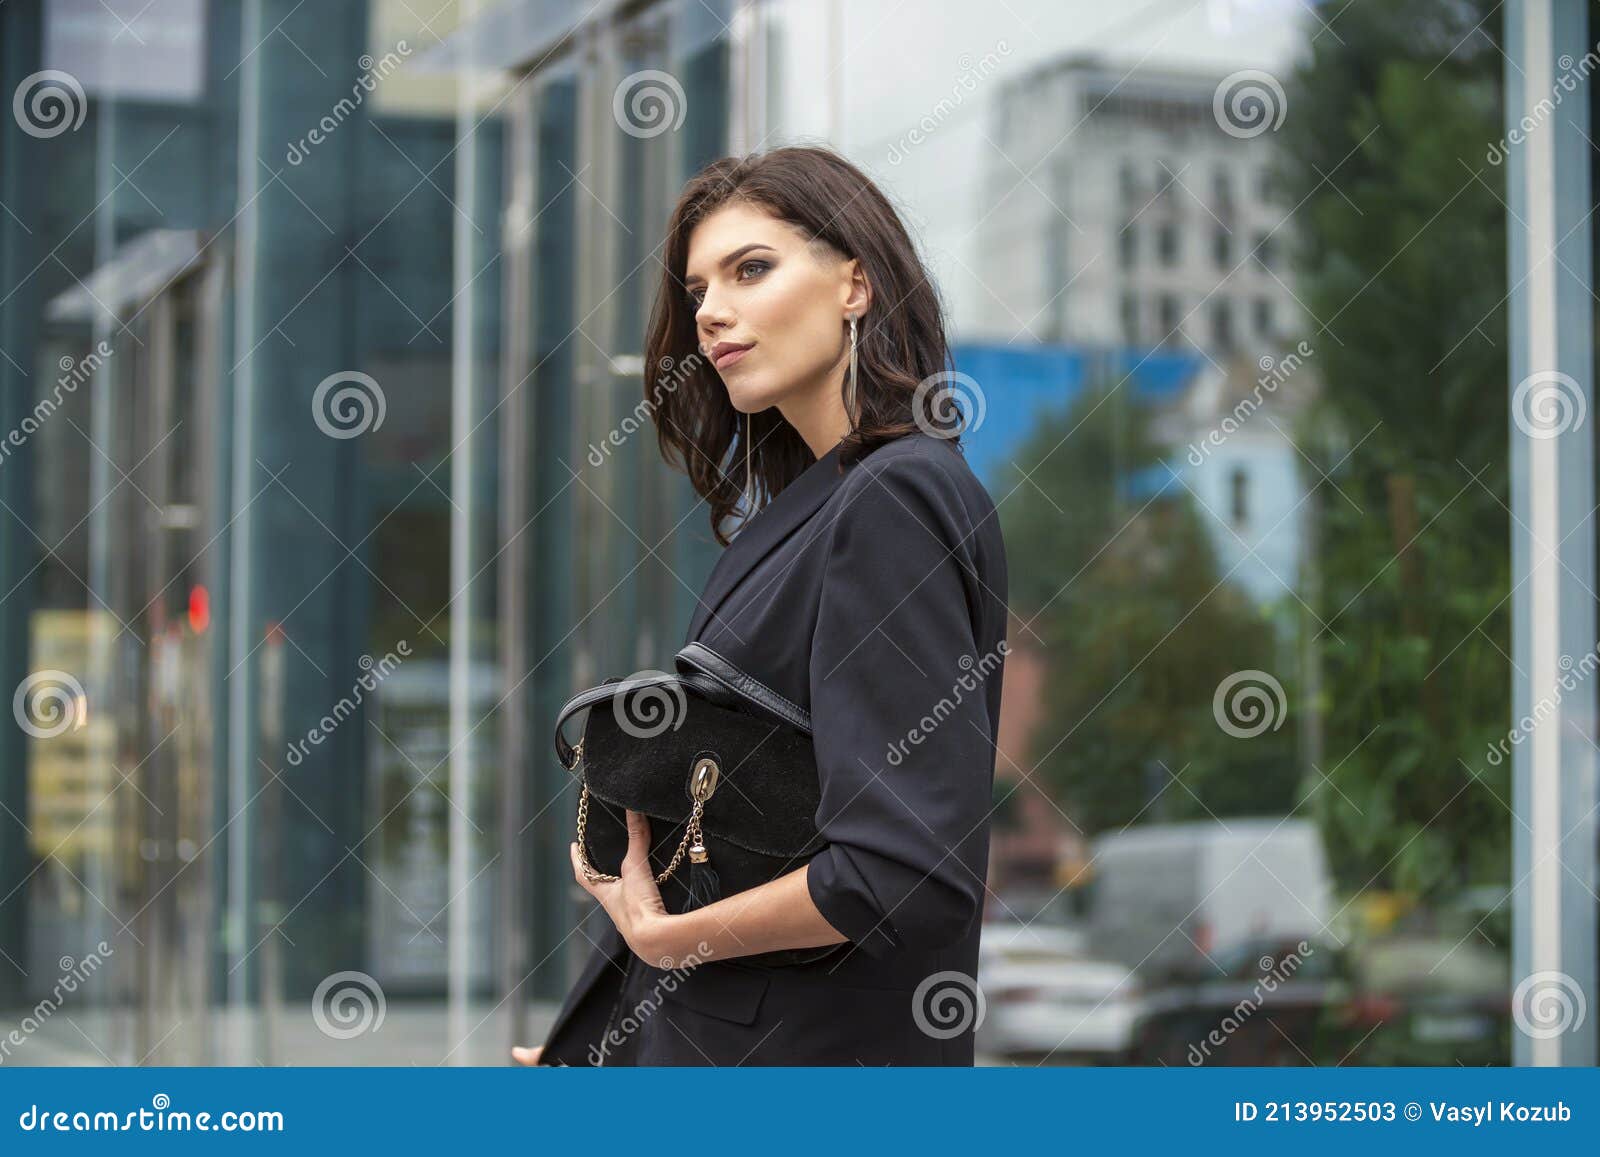 Woman in business suit stock image. Image of confident - 213952503